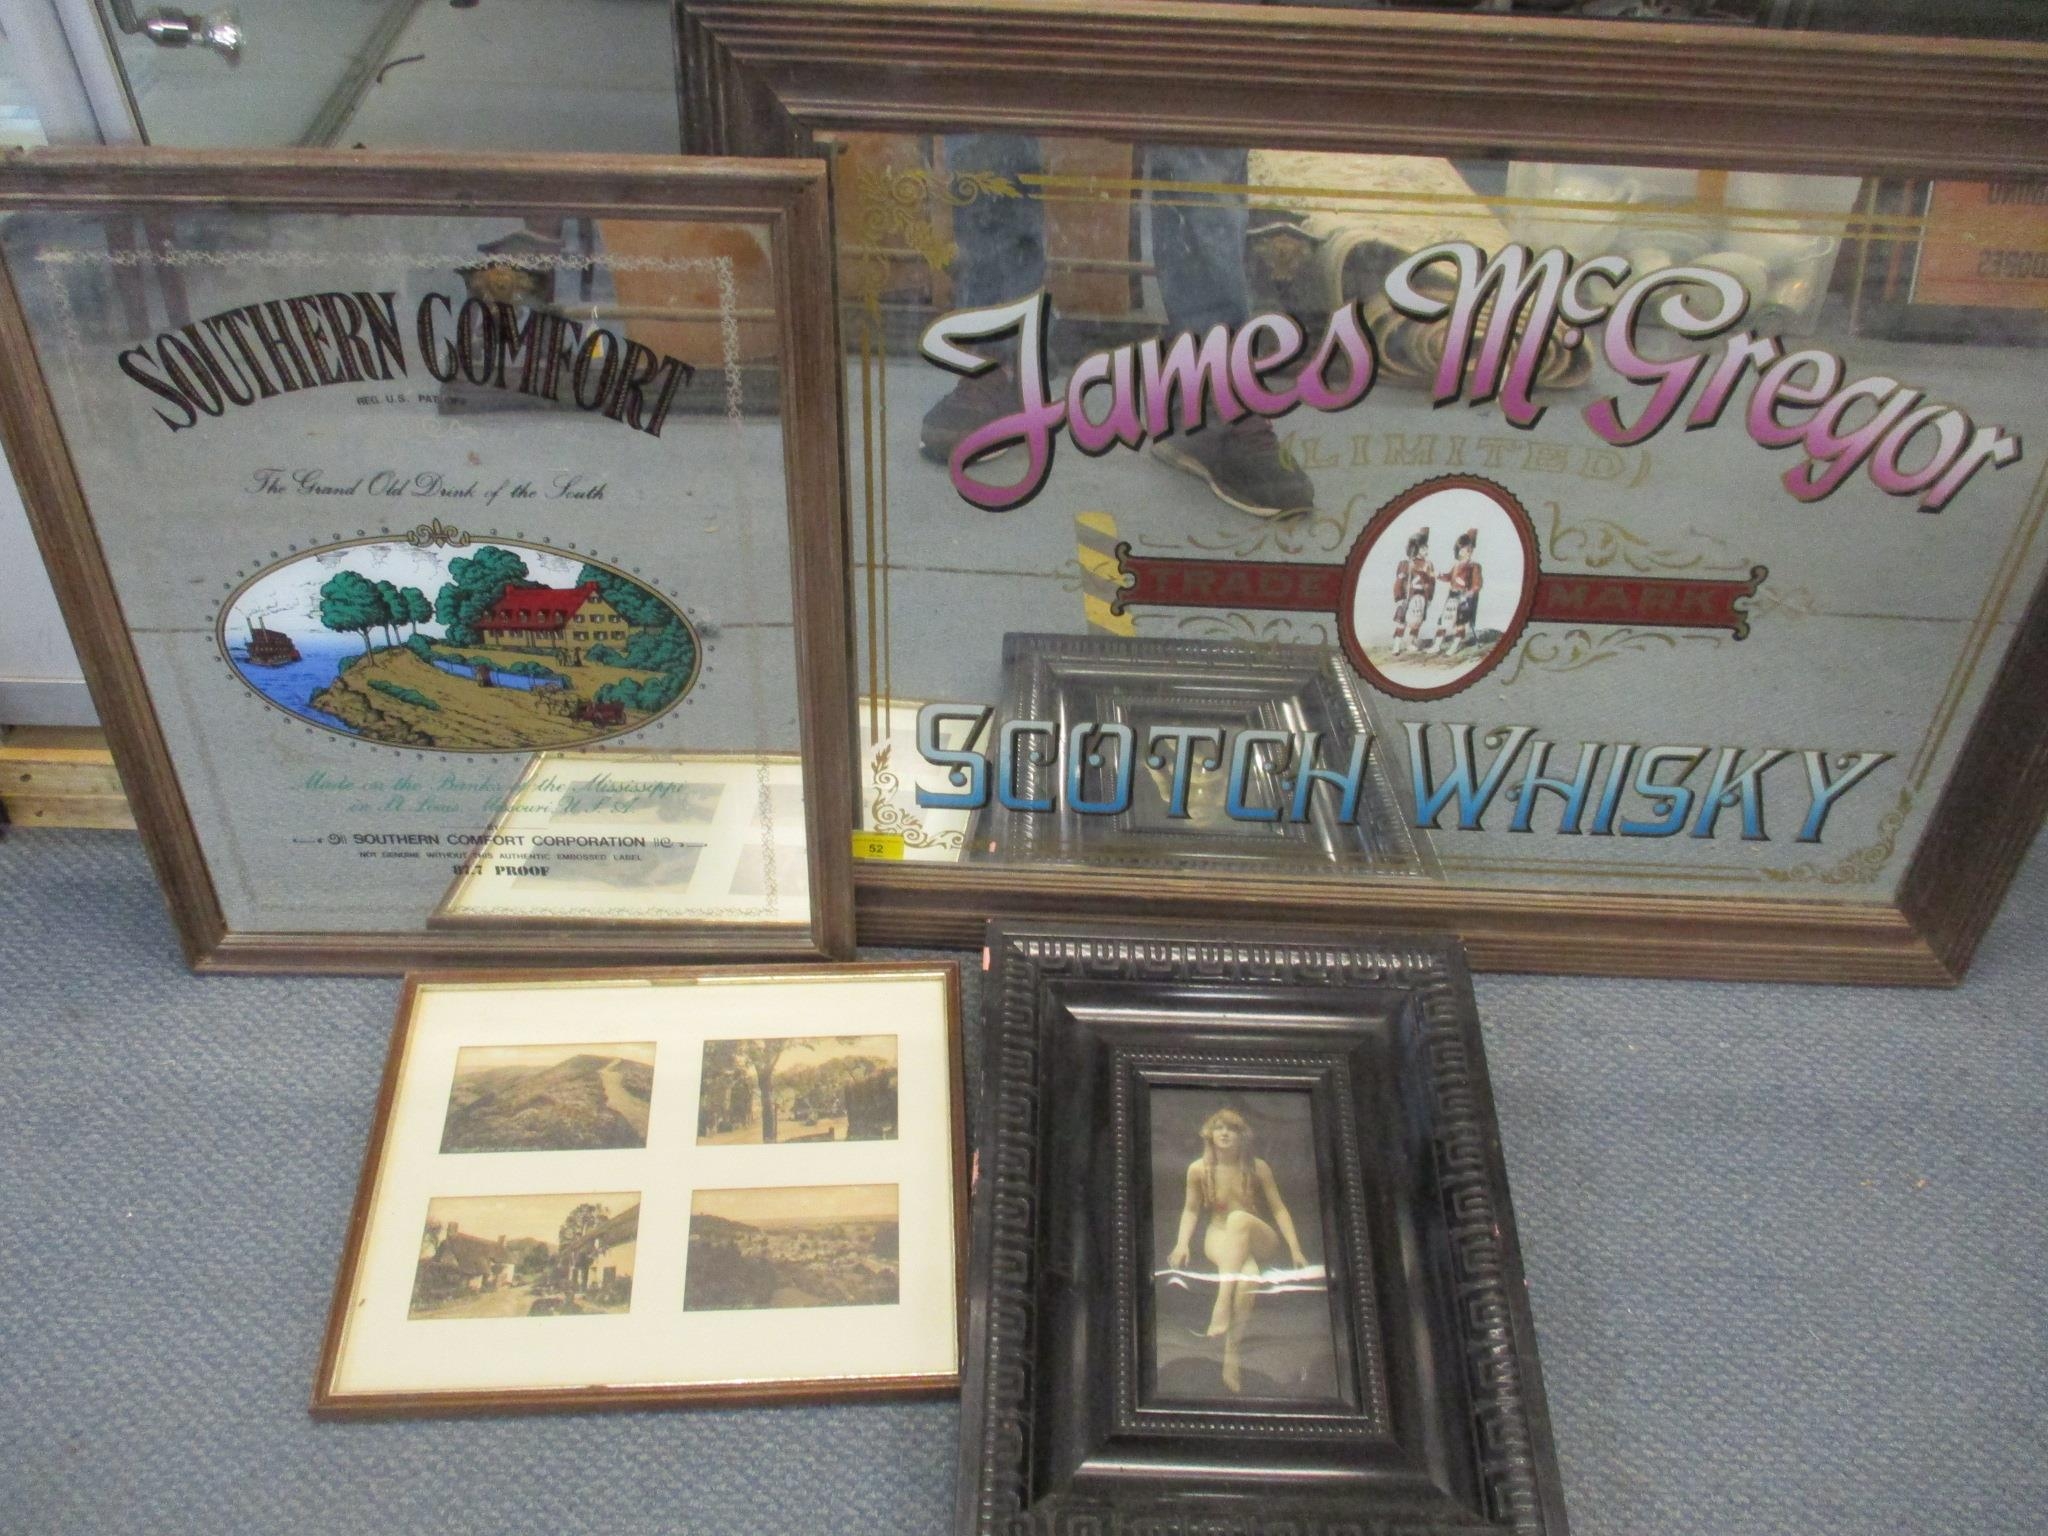 Two late 20th century advertising mirrors, James McGregor and Southern Comfort, an early 20th